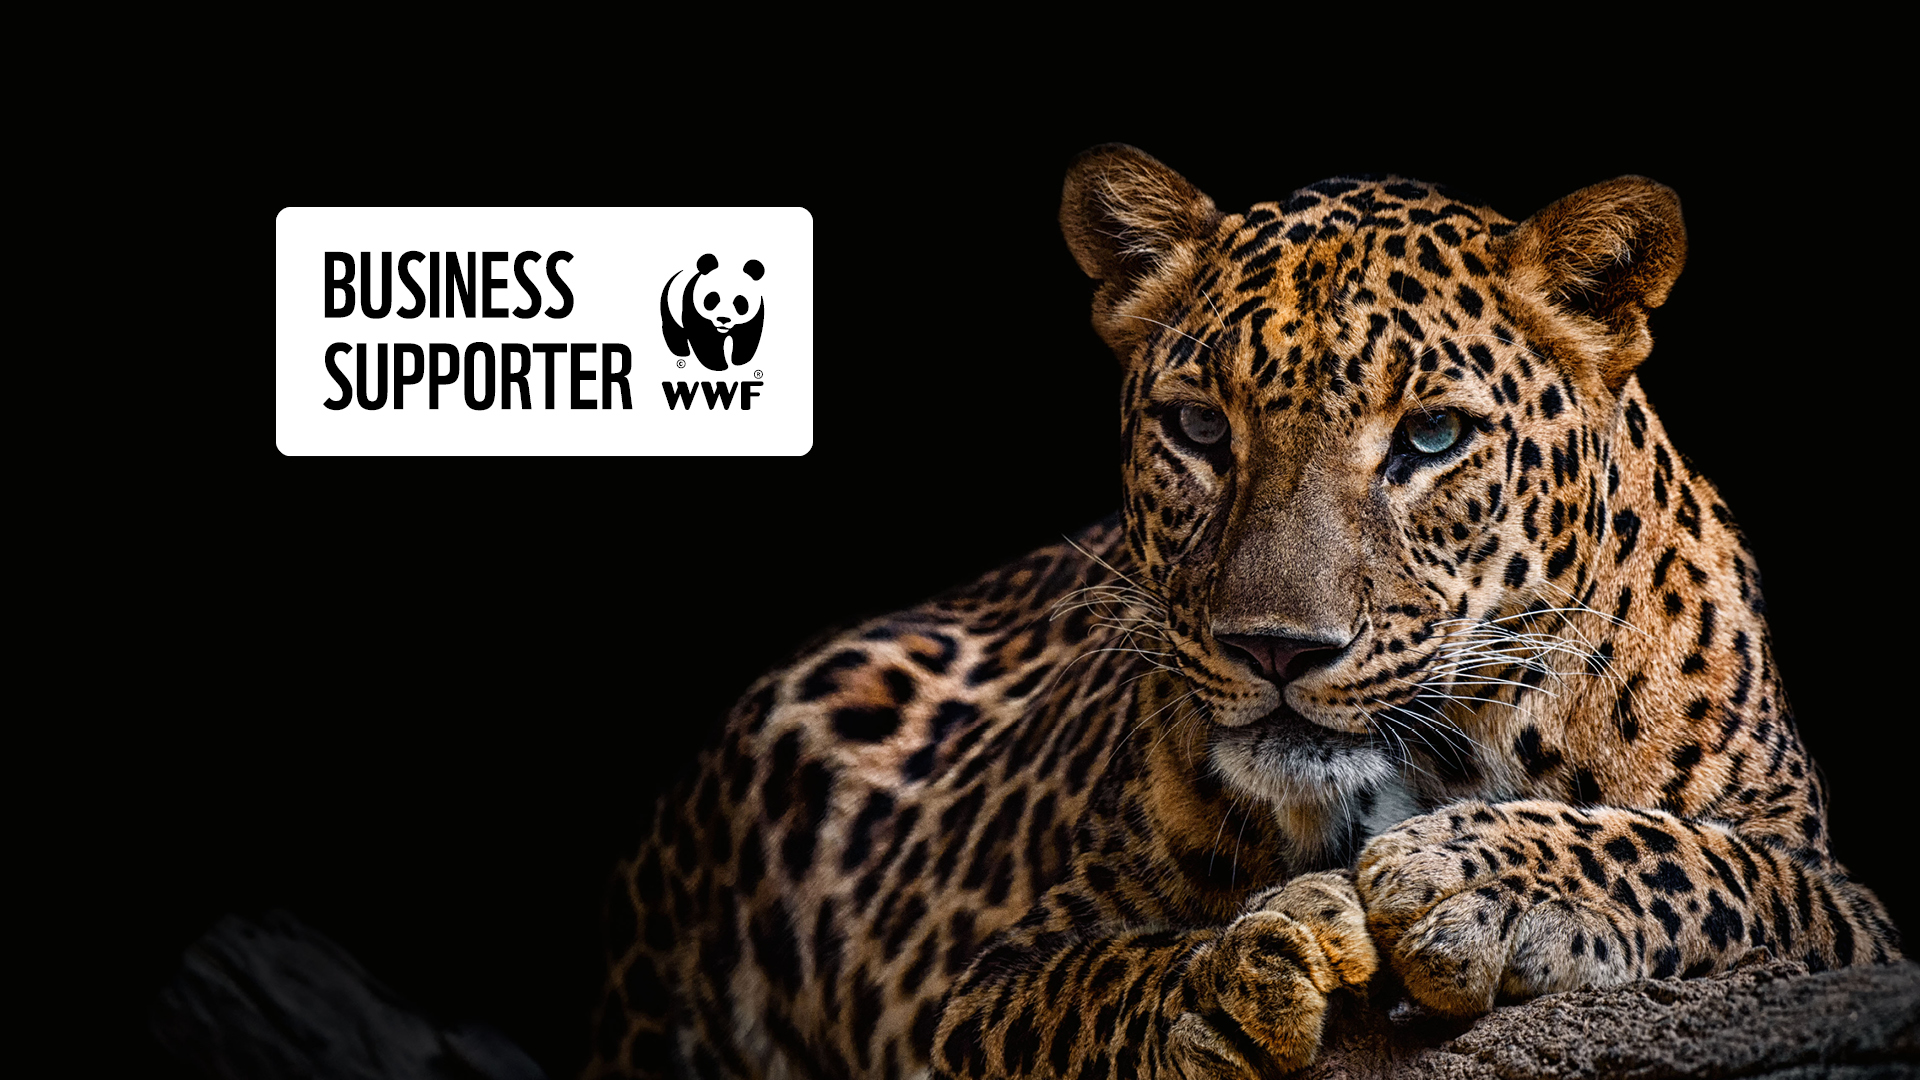 WWF business supporter-1920x1080px